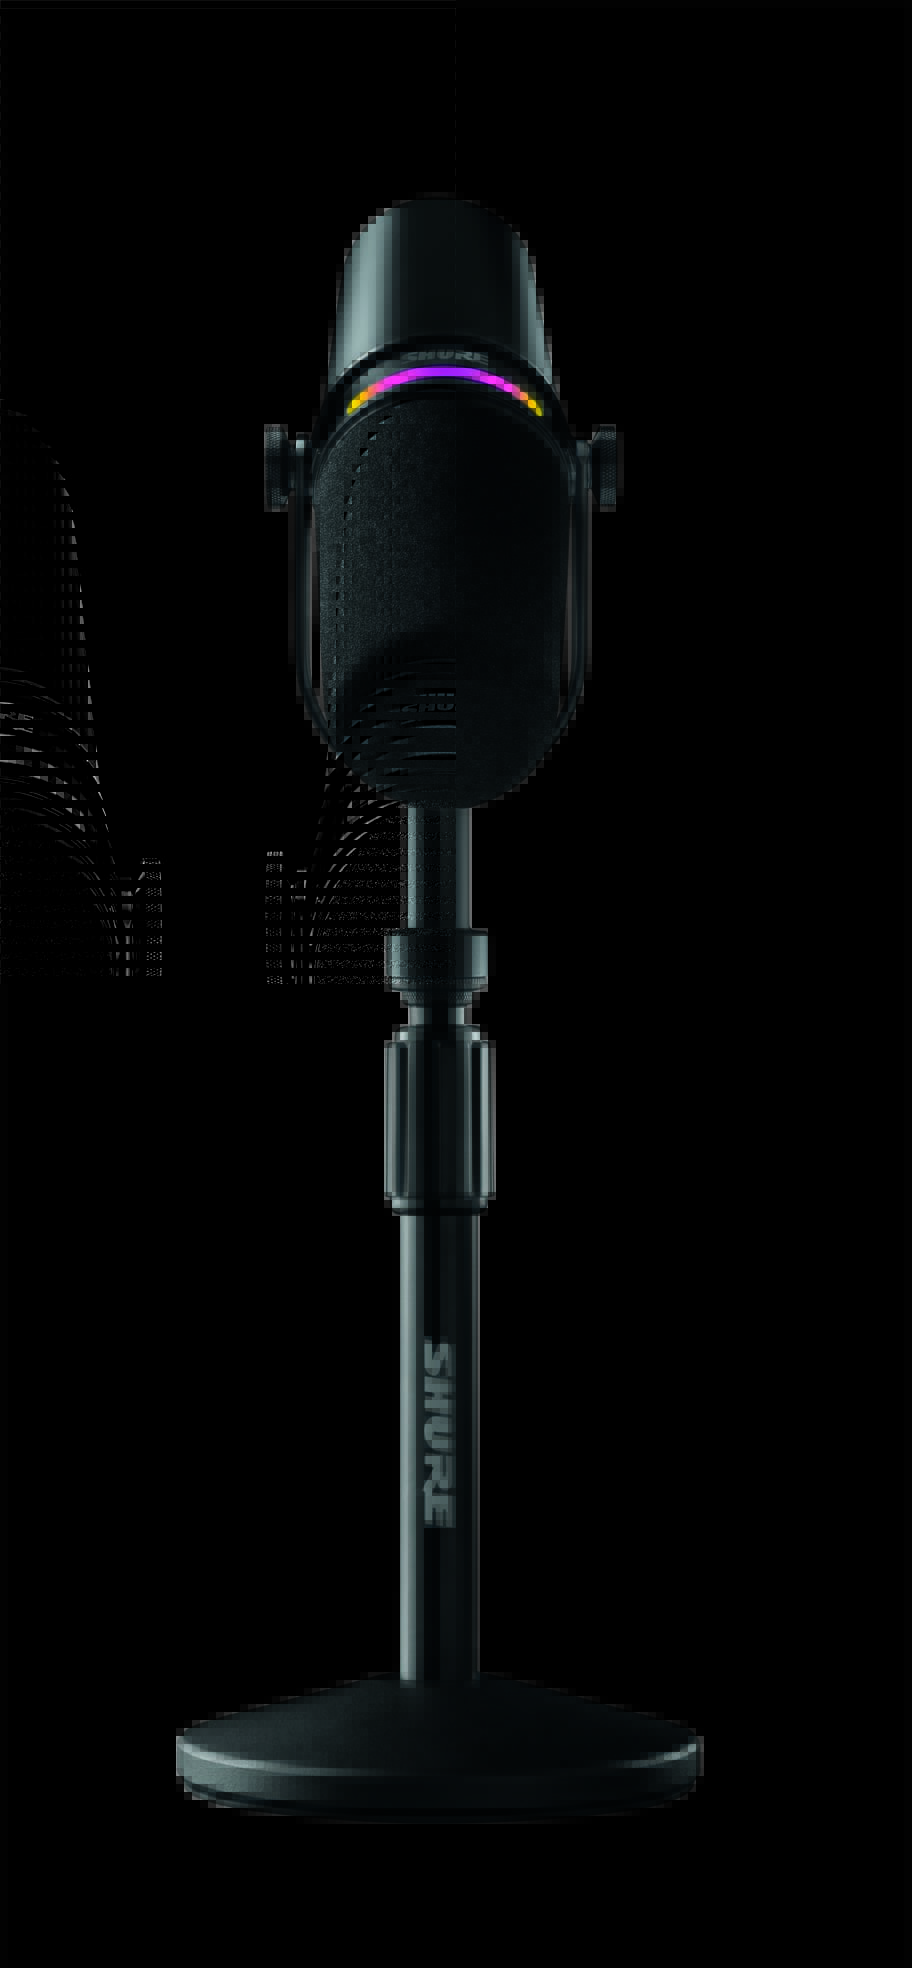 Shure’s New MV7+ Podcast Microphone